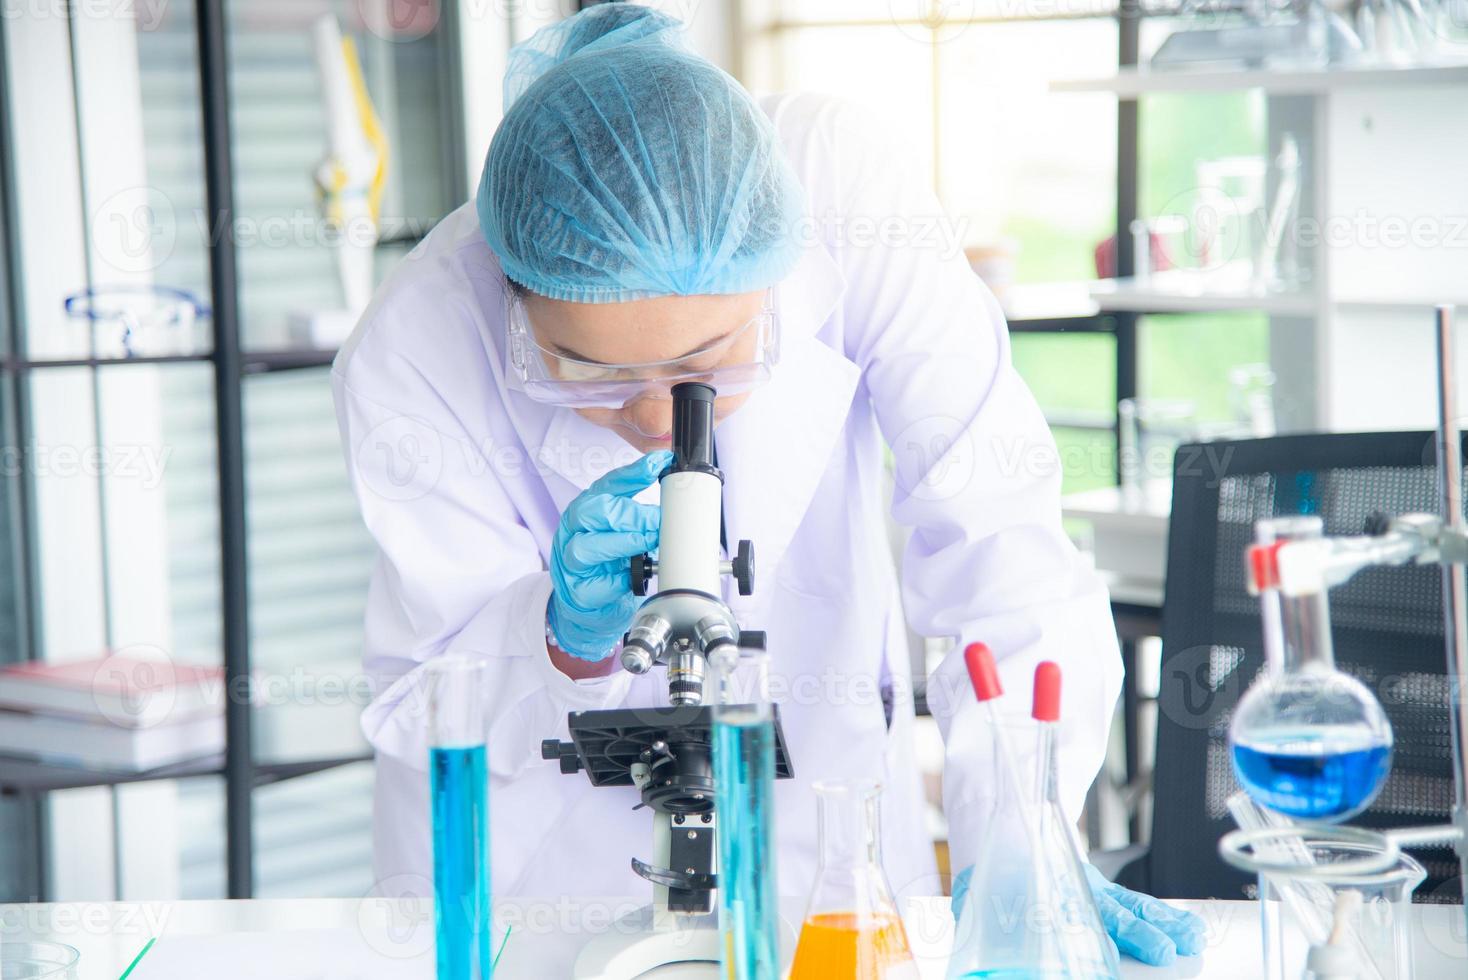 Asian woman scientist, researcher, technician, or student conducted research or experiment by using microscope which is scientific equipment in medical, chemistry or  biology laboratory photo